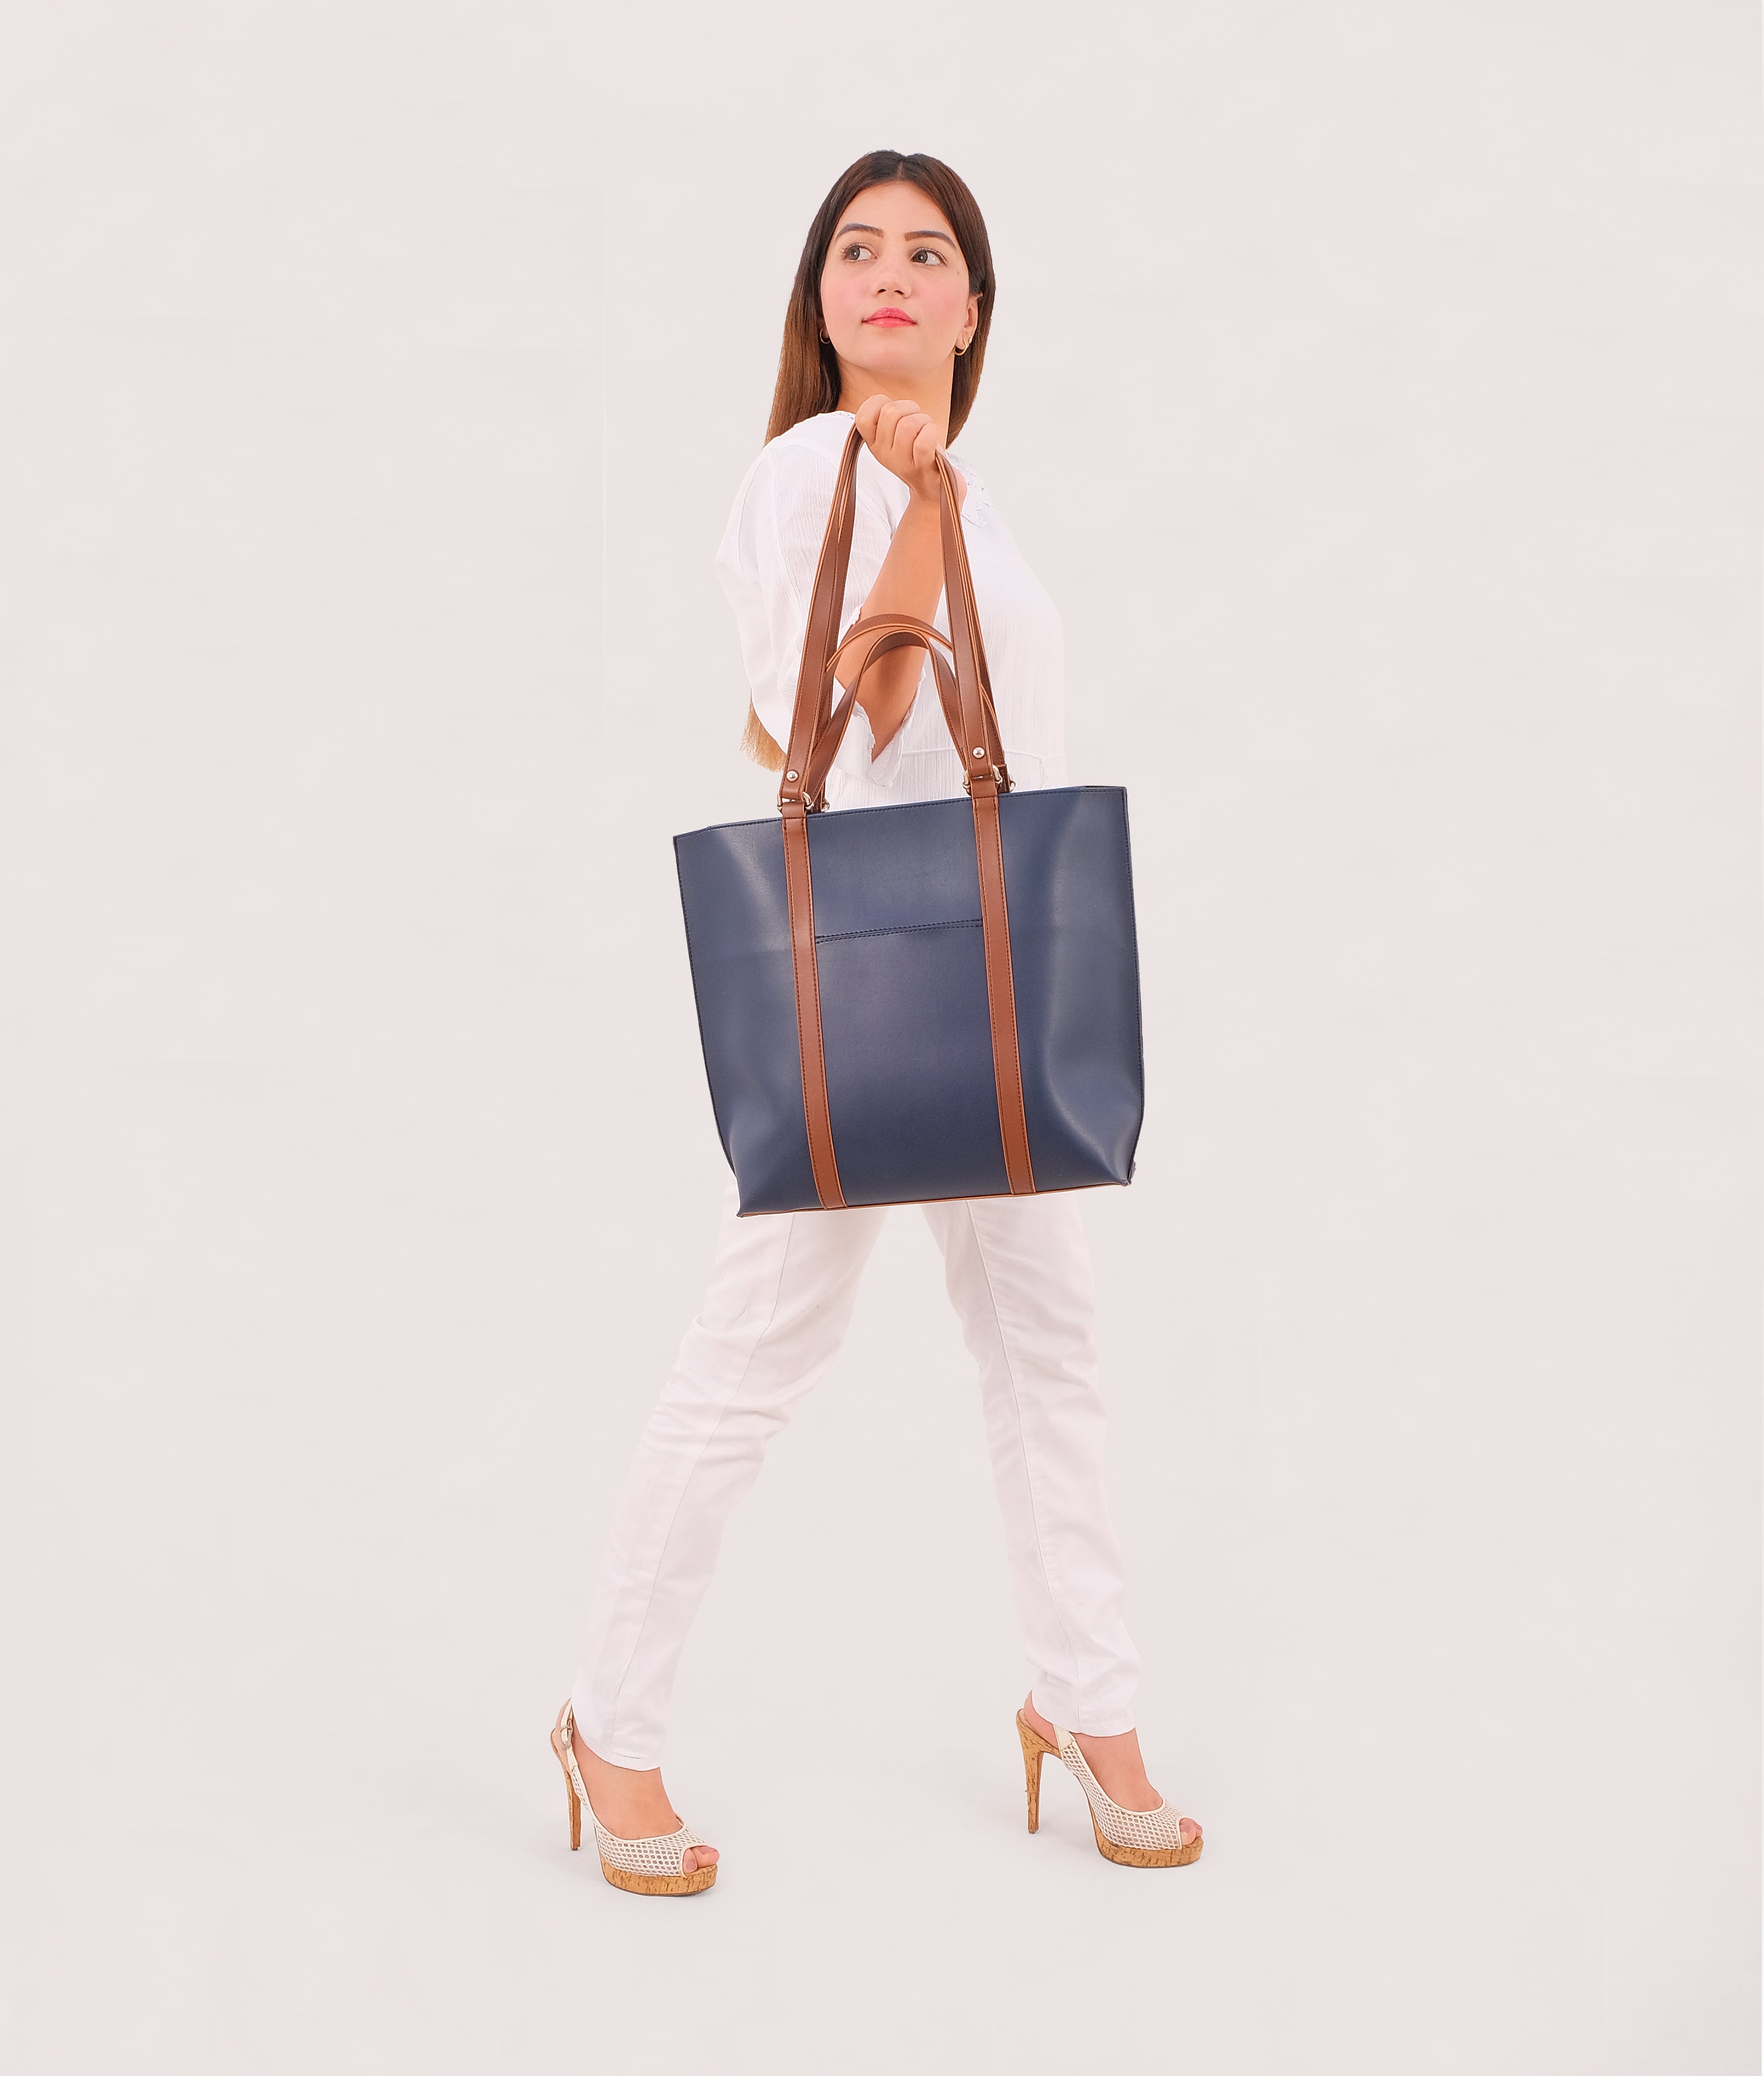 Blue and brown double-handle tote bag